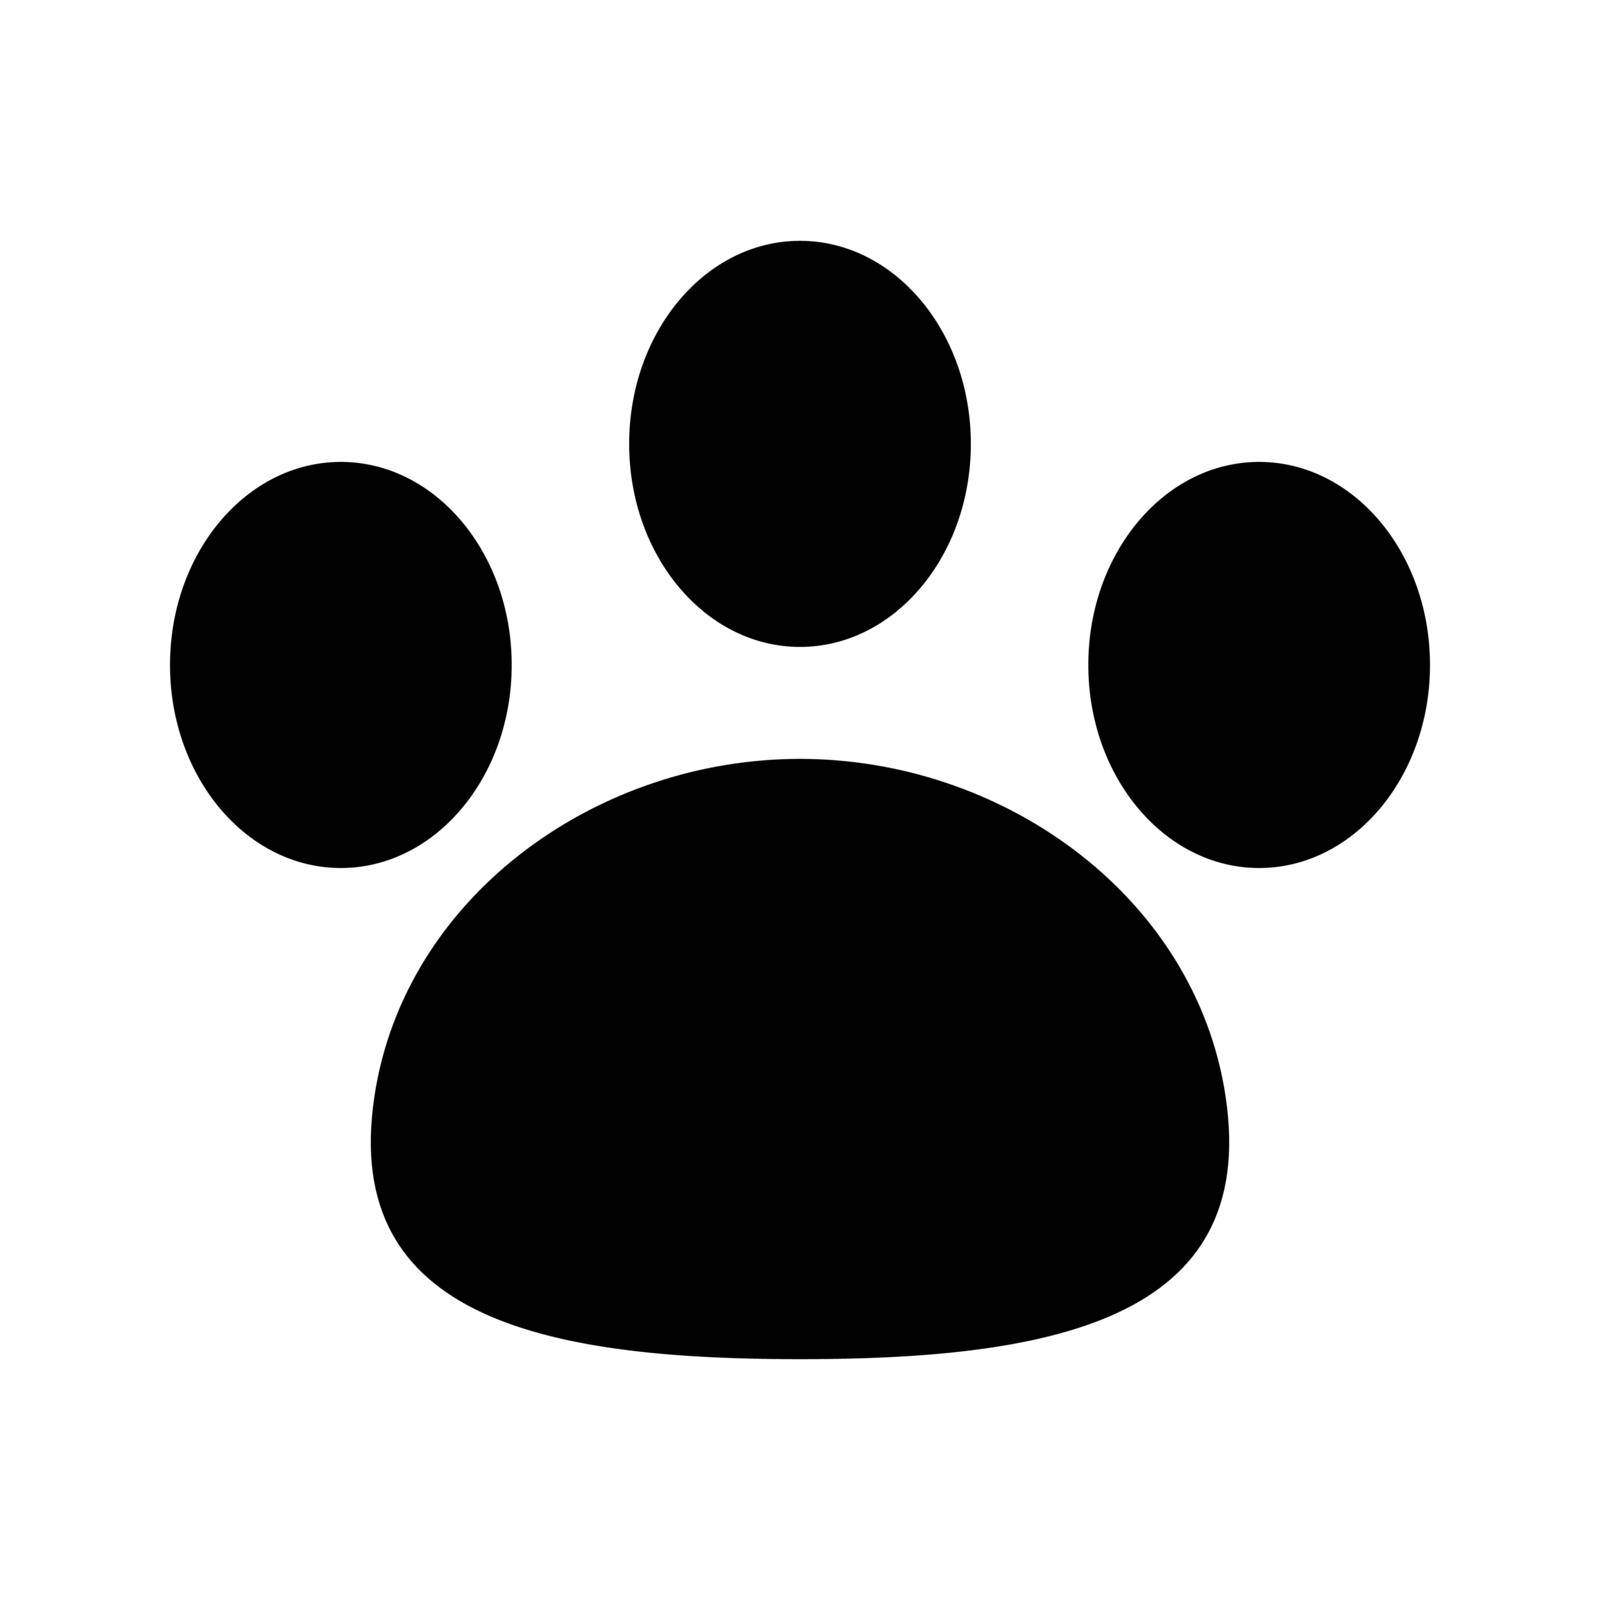 Rounded paw silhouette icon. Animal symbol. Editable vector.